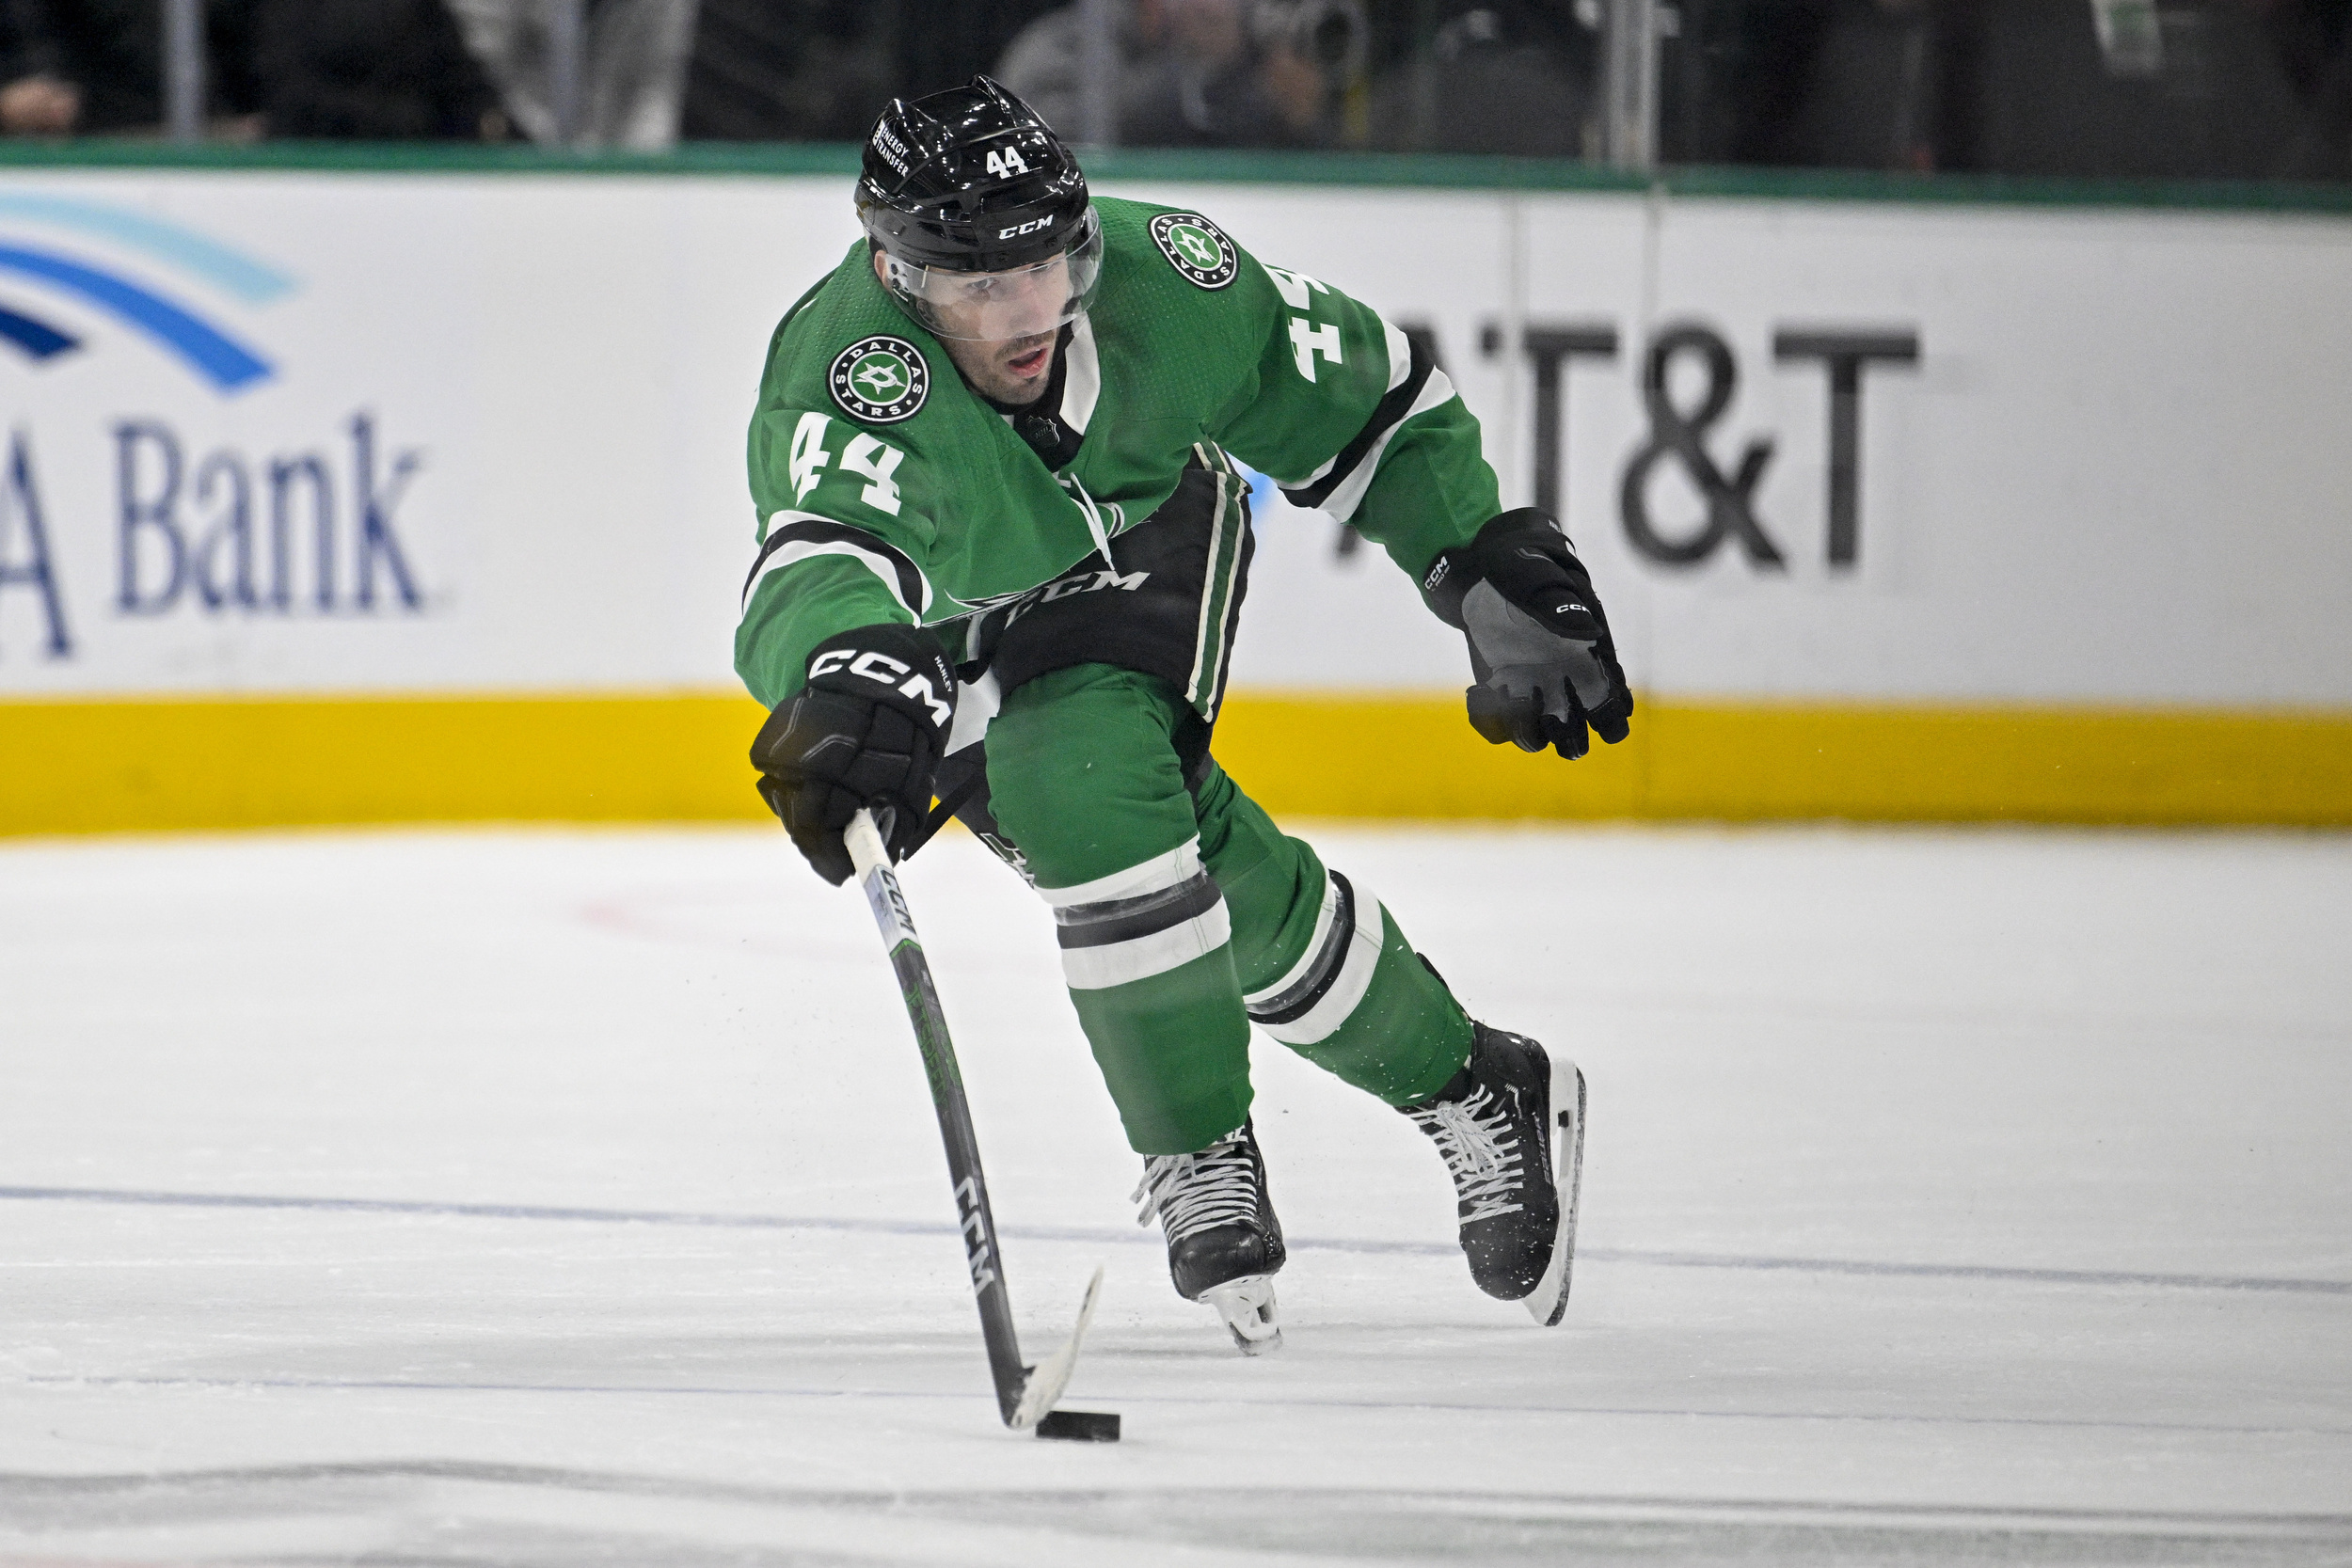 stars to place veteran defenseman on waivers